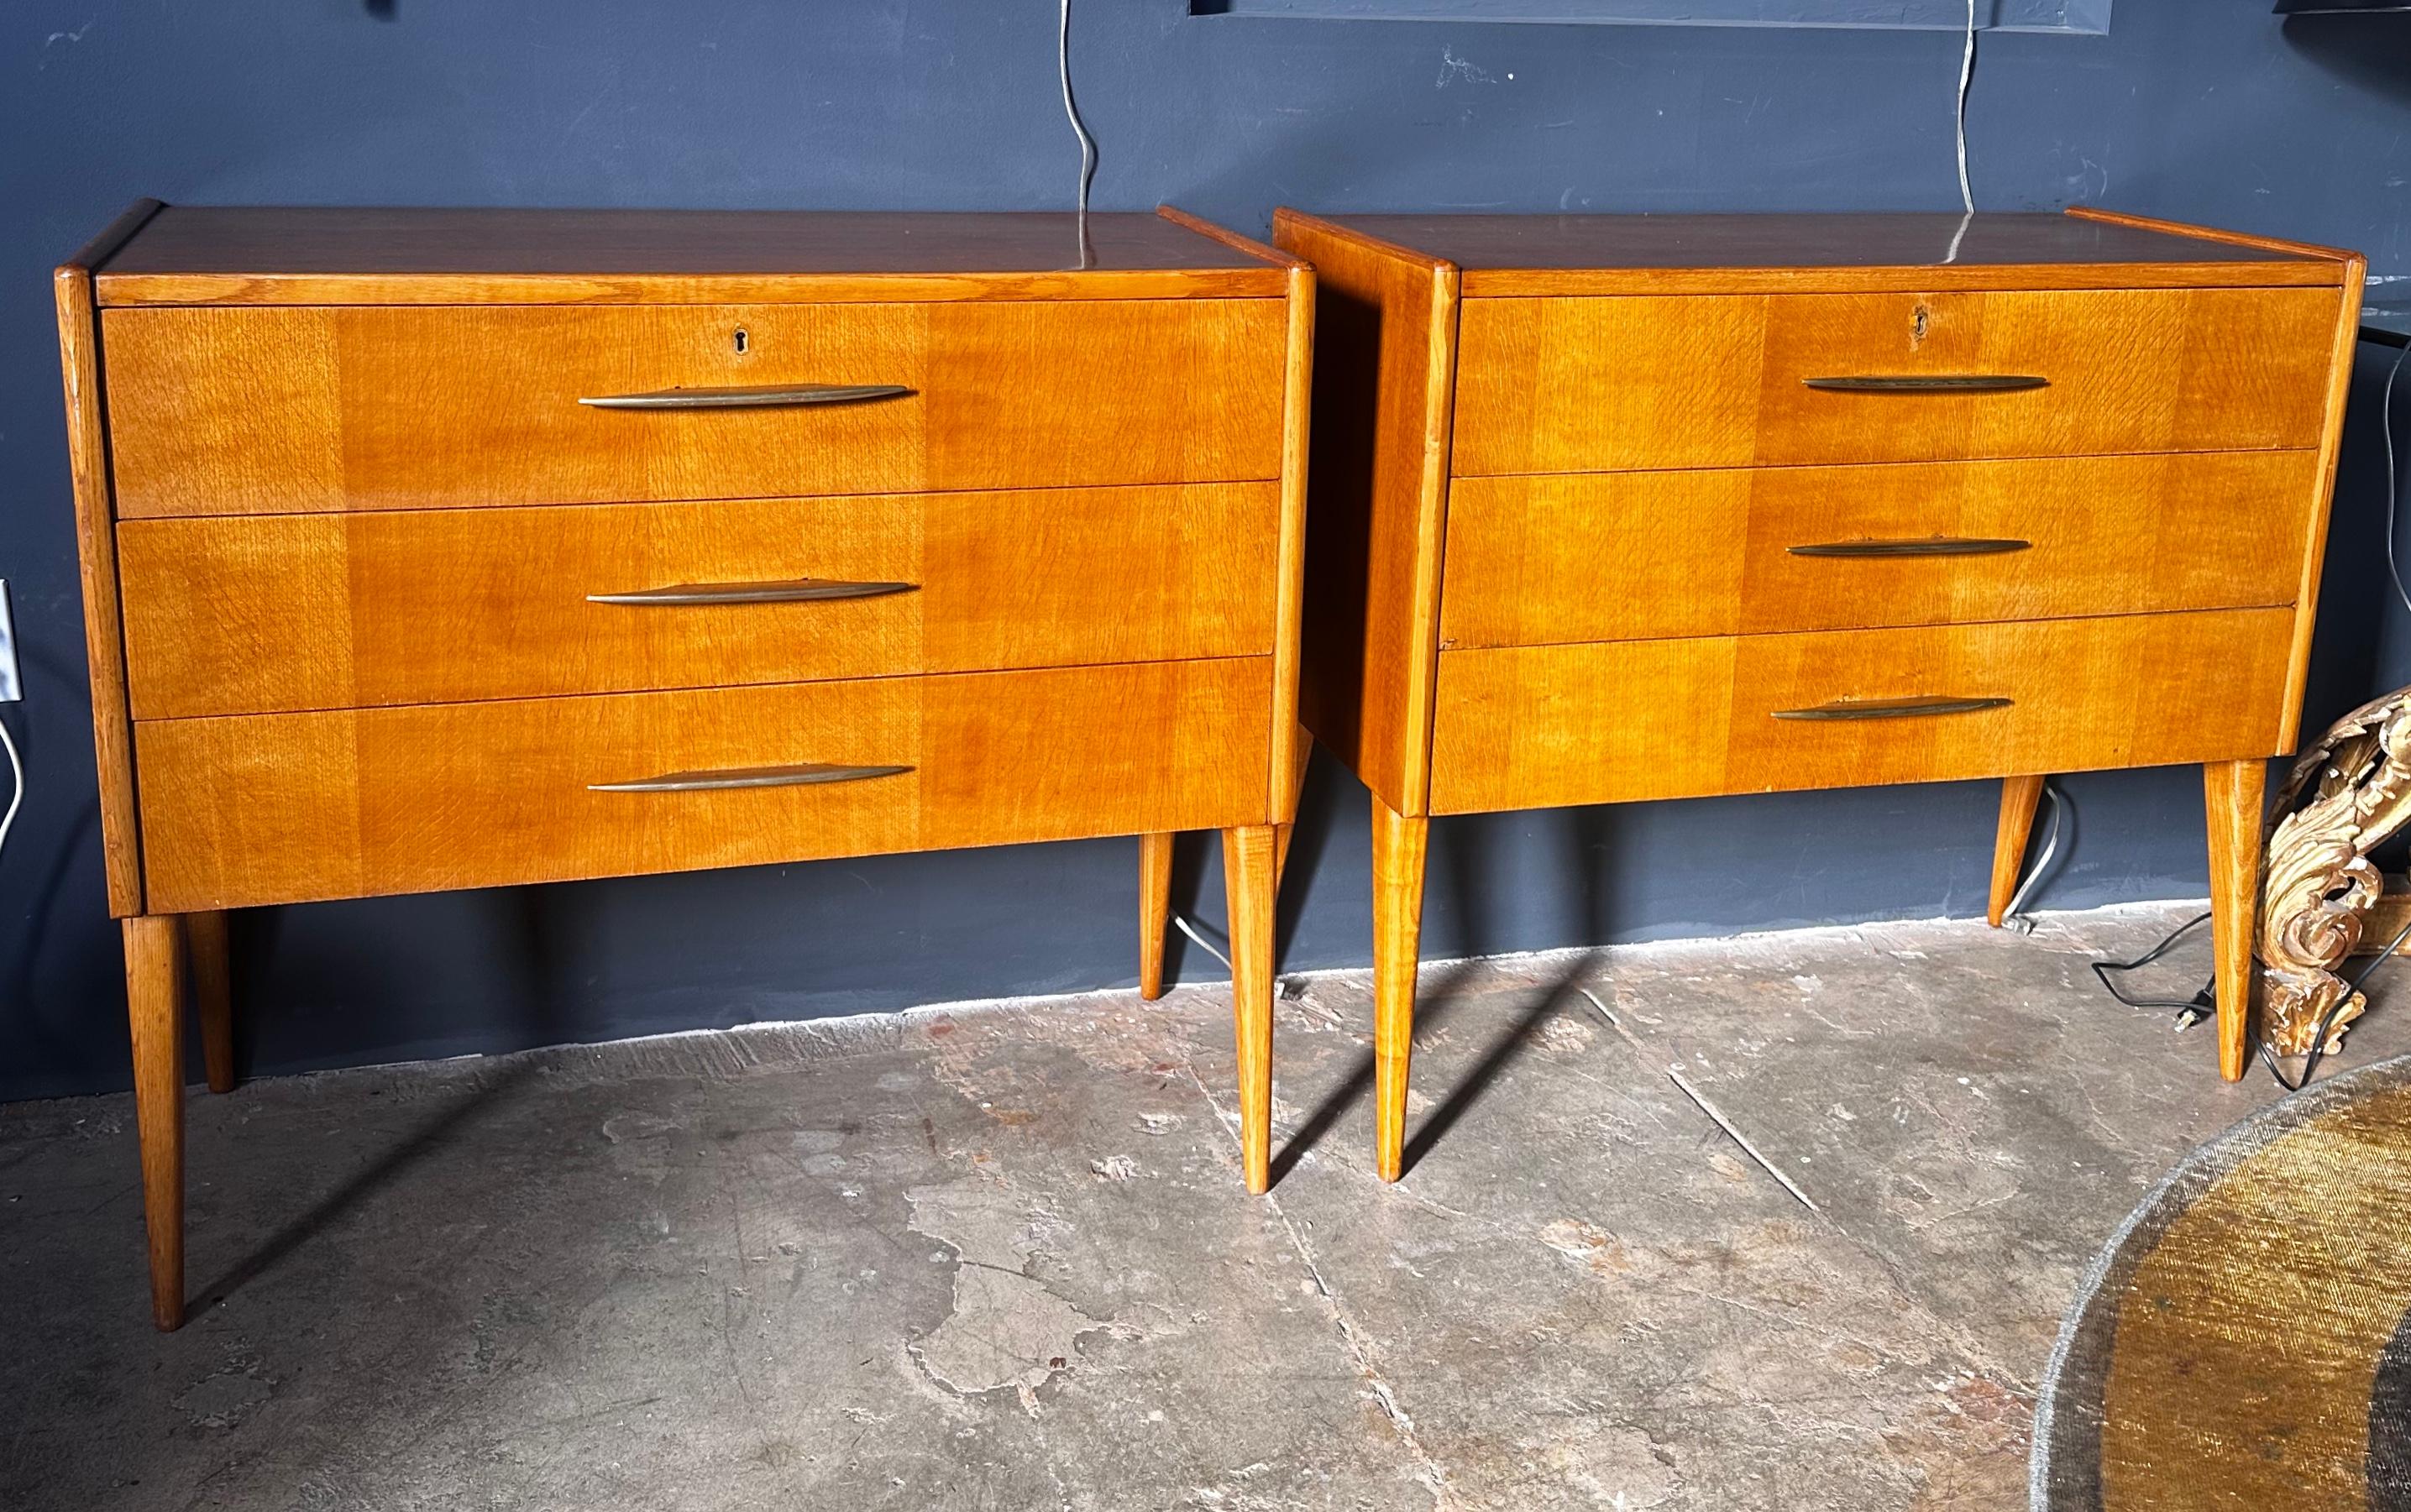 Elevate your space with this exquisite pair of Mid-Century Italian Credenzas. Crafted in the 1970s, each credenza features three drawers adorned with sleek brass handles. The perfect blend of form and function, these pieces bring vintage charm to